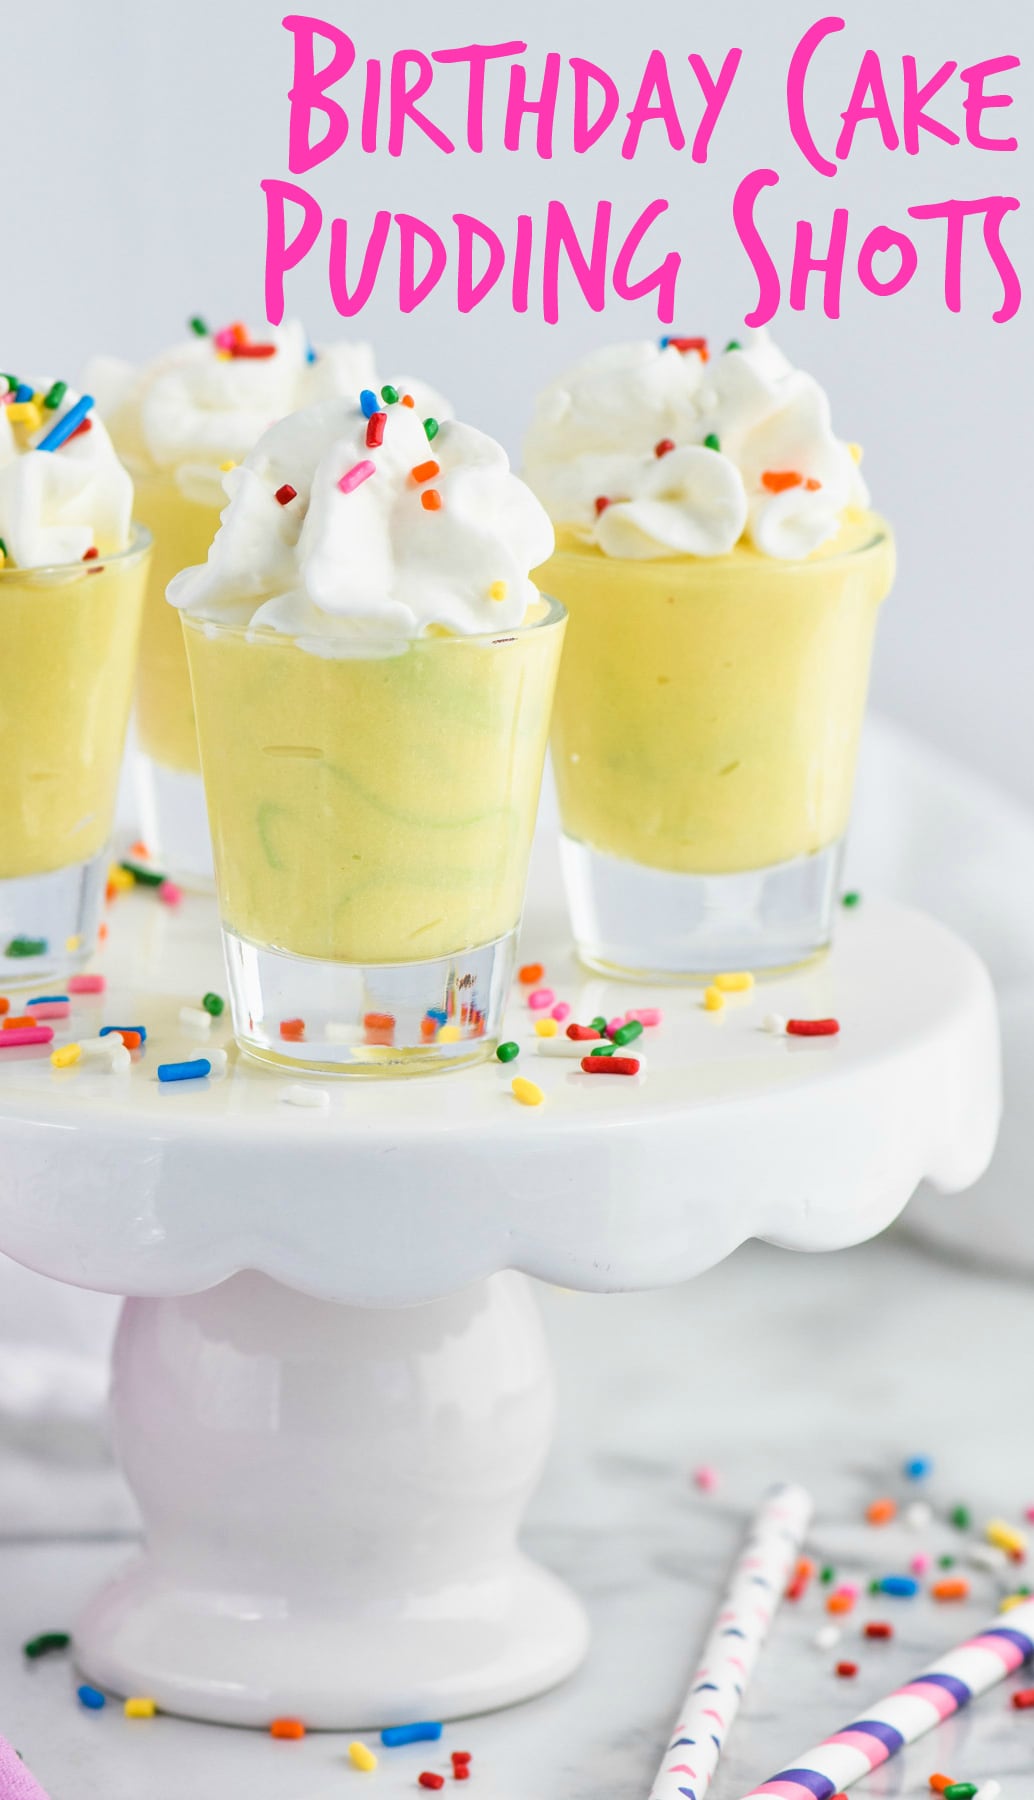 birthday cake pudding shots in shot glasses on cake stand